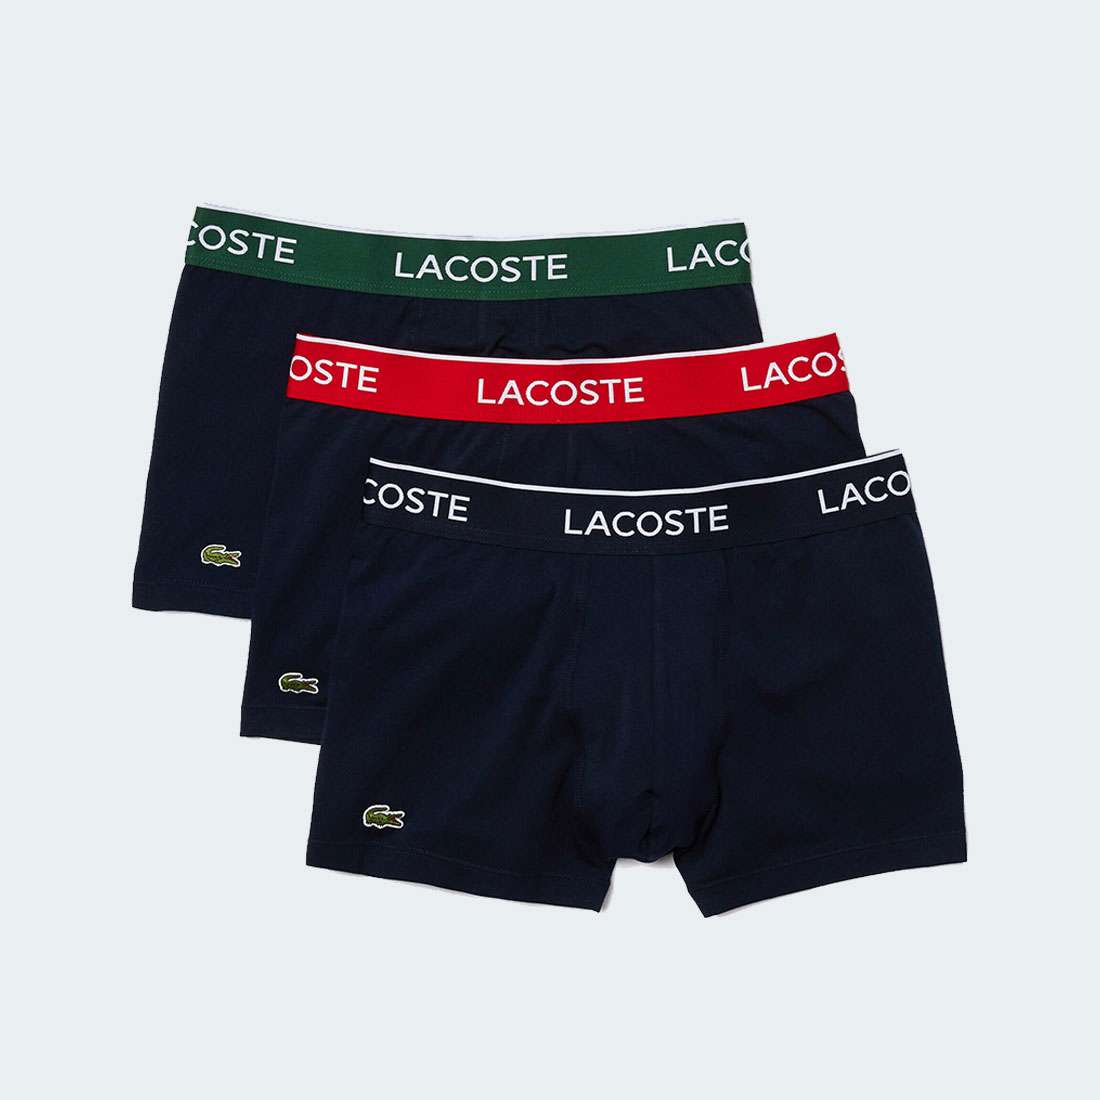 PACK 3 BOXERS LACOSTE 5H3401 NAVY BLUE/GREEN